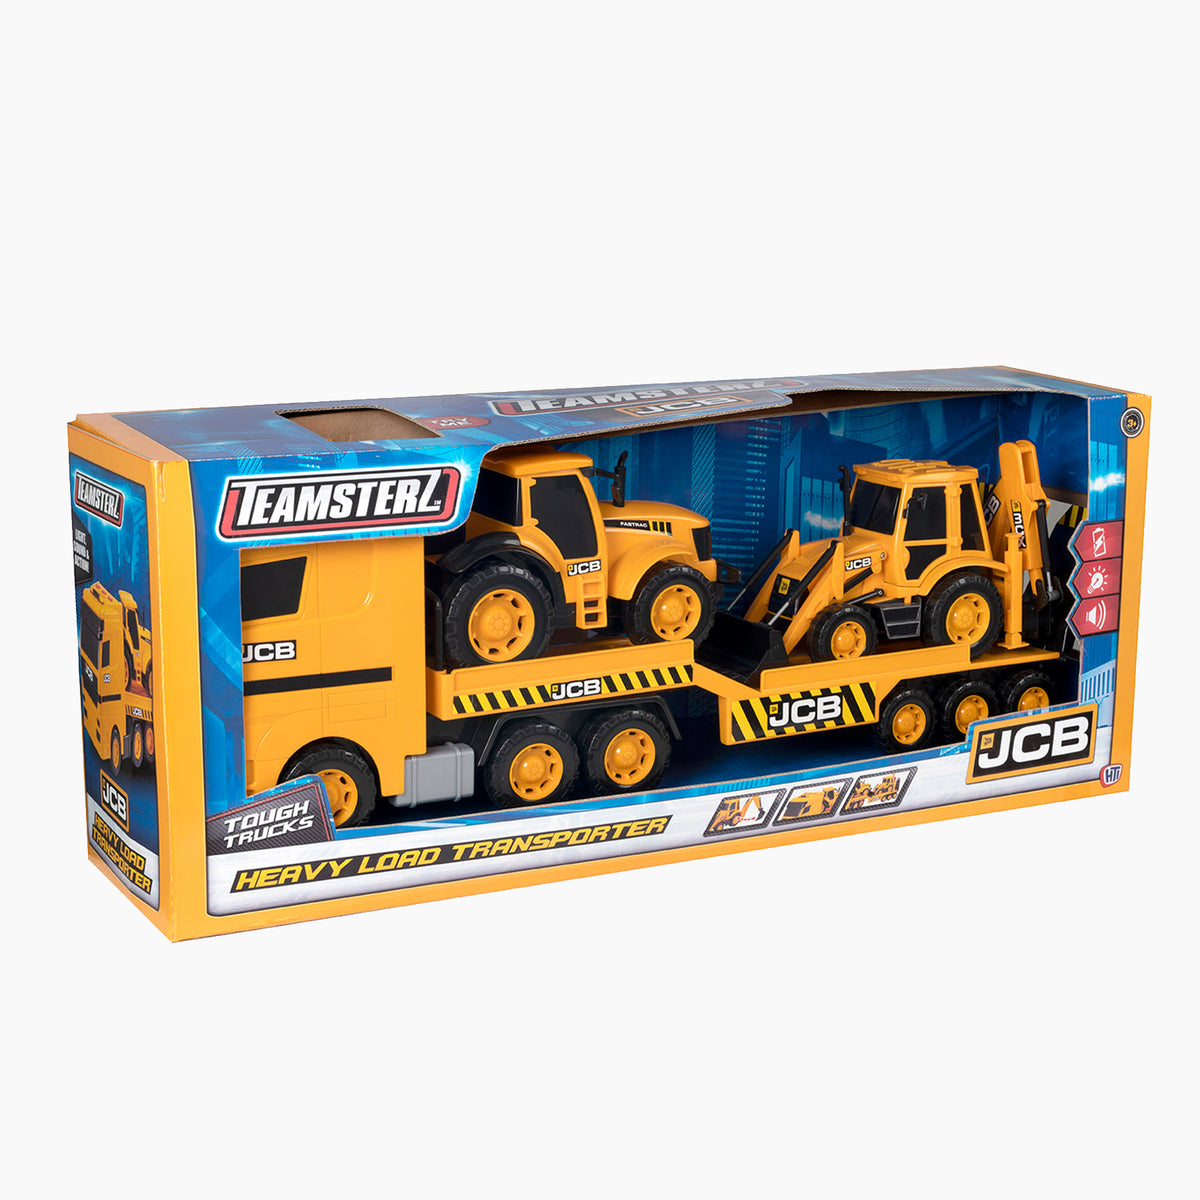 Box image of the JCB Heavy Loader Transporter from Teamsterz